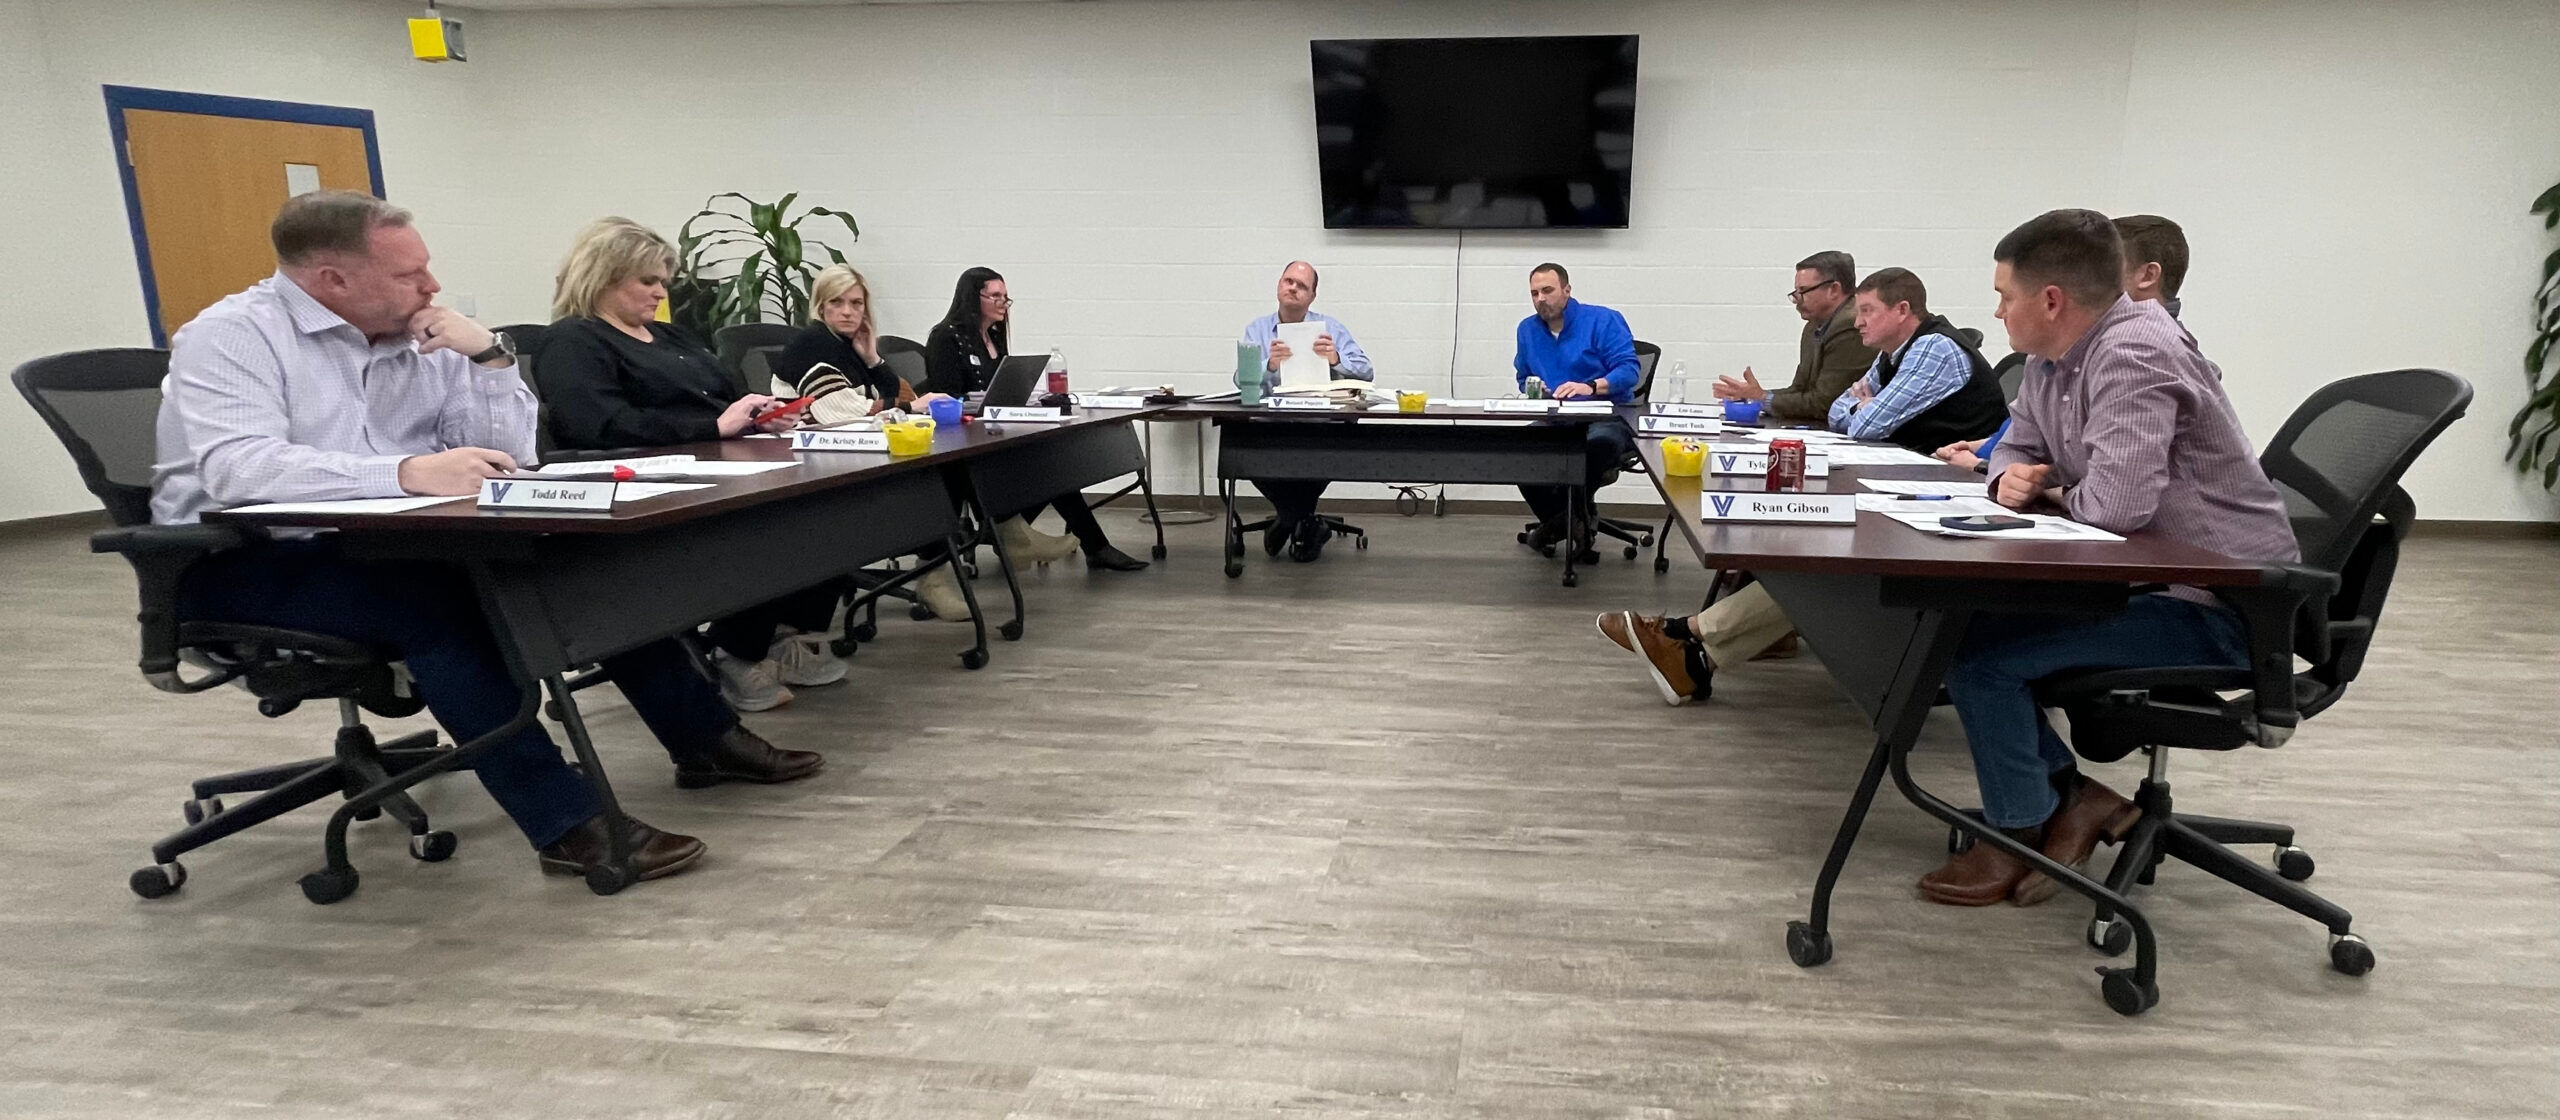 valley-view-school-board-discusses-progress-on-construction-projects